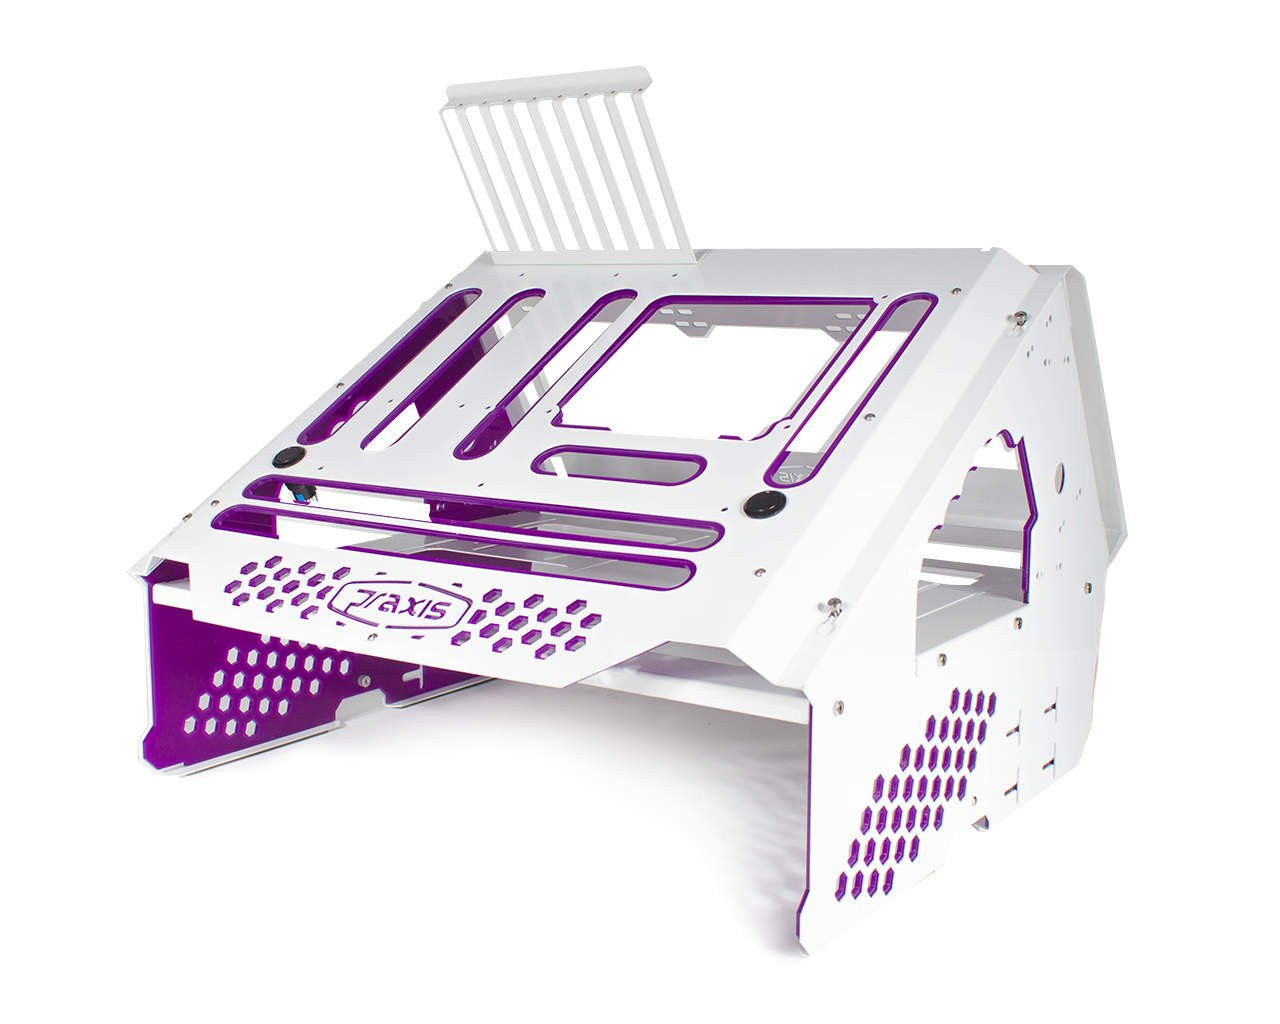 Praxis WetBench - PrimoChill - KEEPING IT COOL White w/Solid Purple Accents